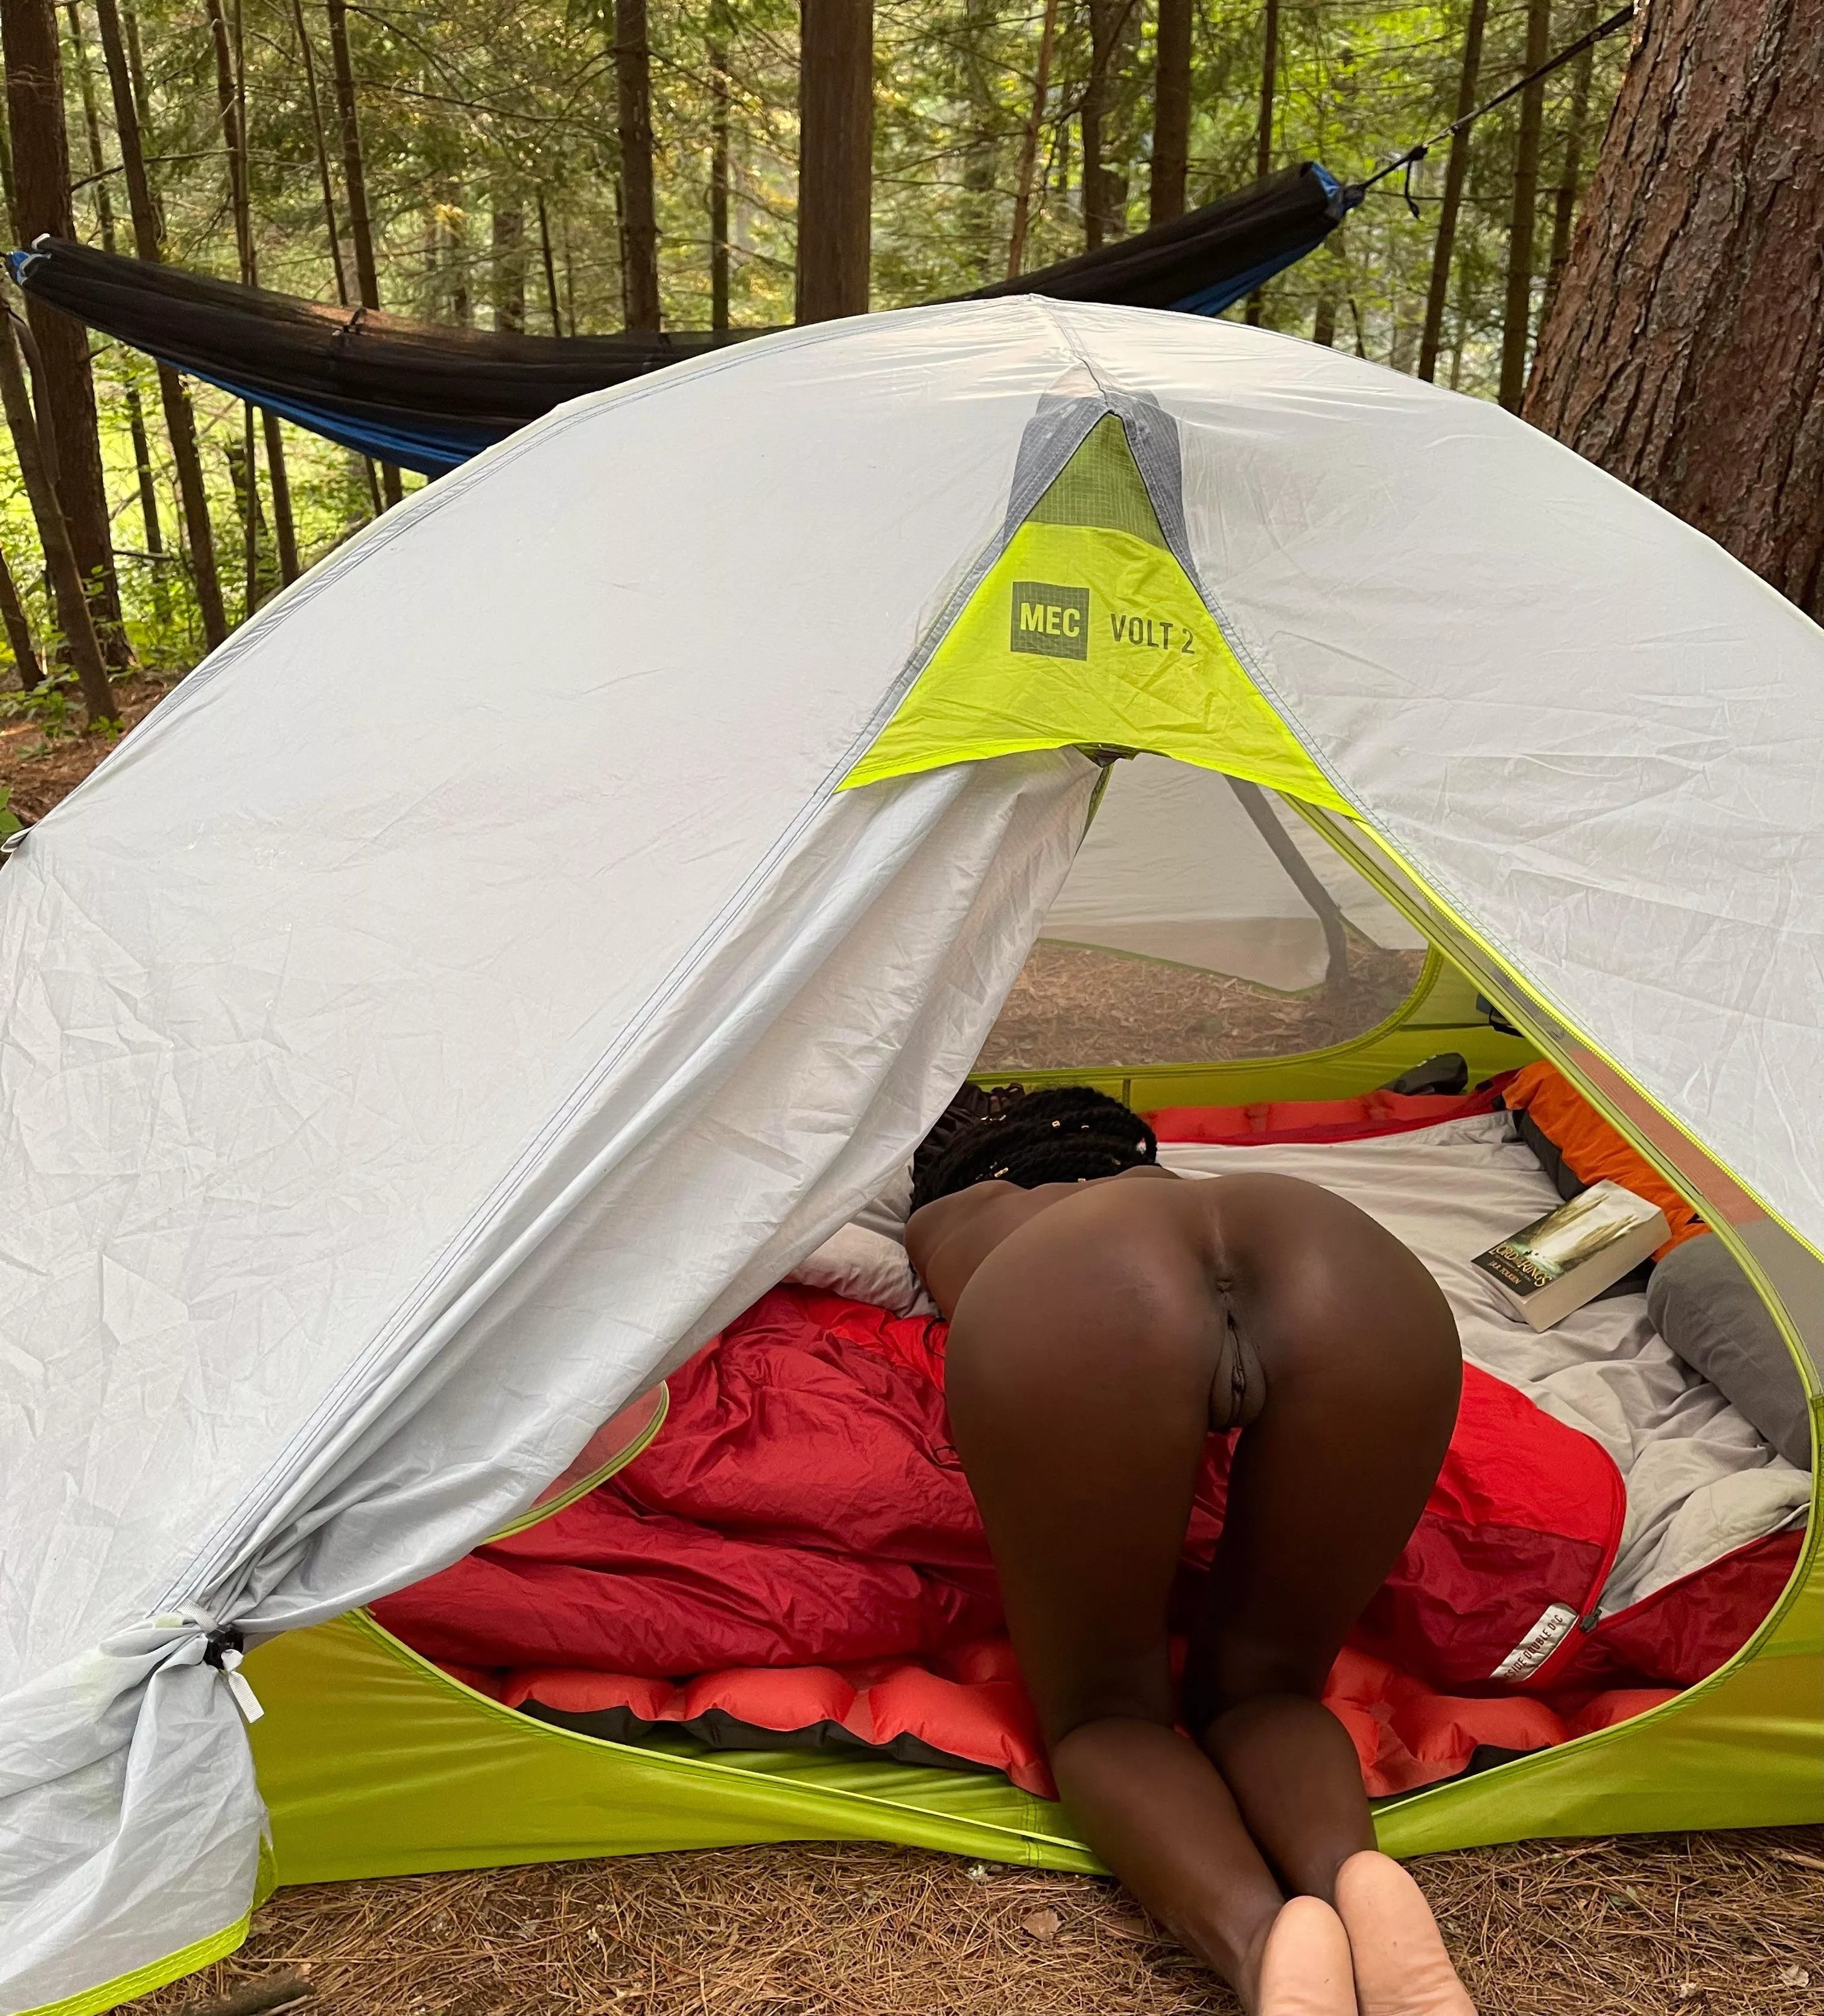 Face Down Butt Naked Beach - I love being face down and ass up anywhere. Even when I'm camping out in  the woods. I'm always ready to take cock ðŸ˜œ nudes | GLAMOURHOUND.COM